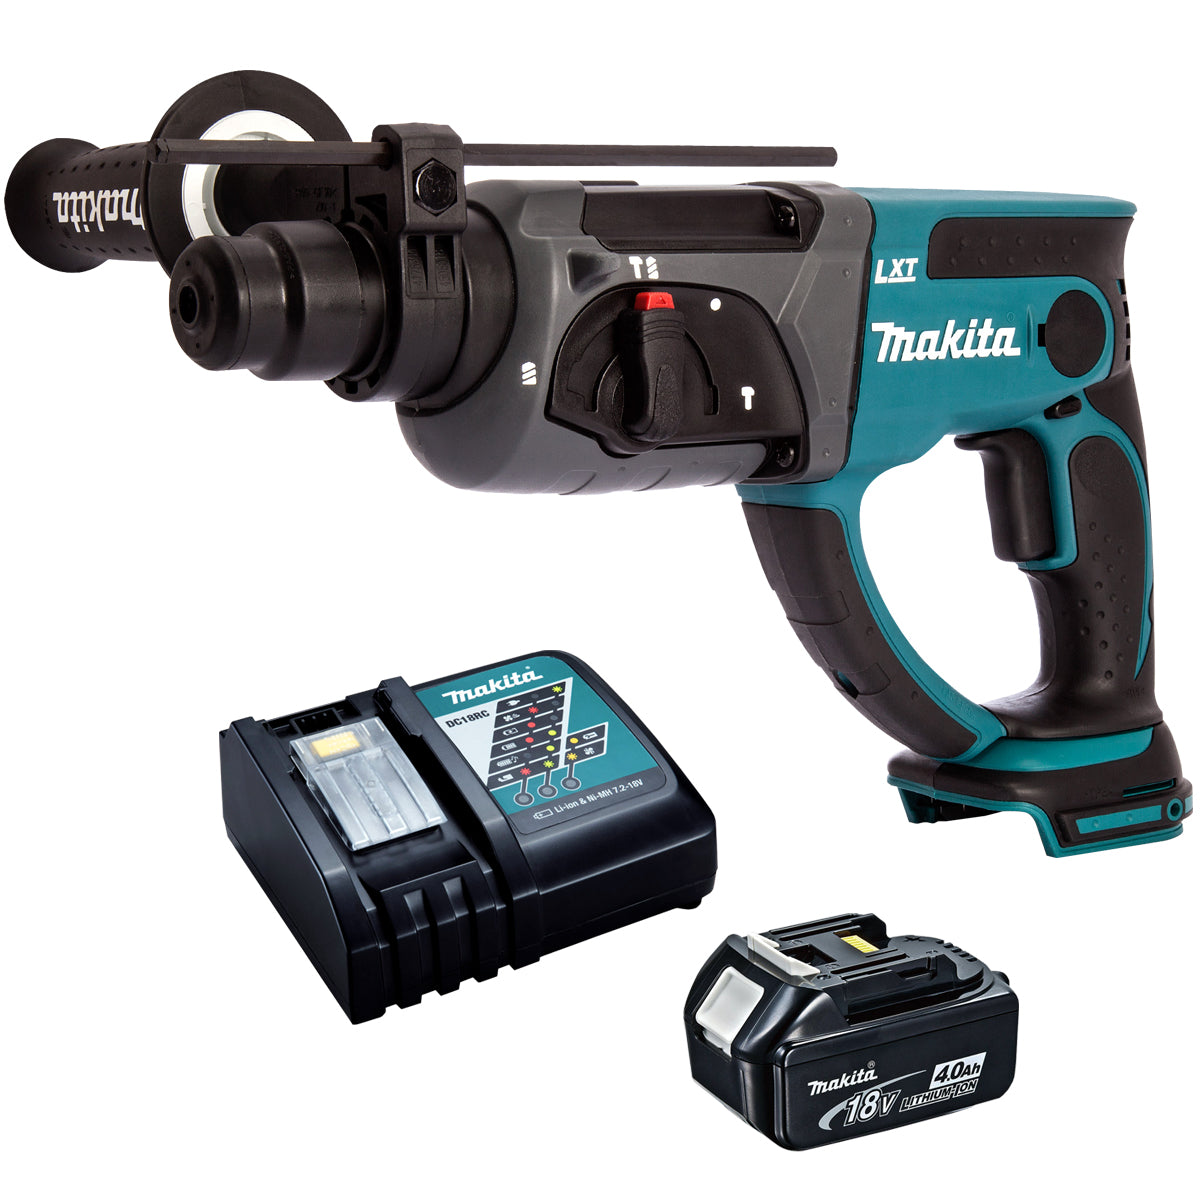 Makita DHR202Z 18V SDS+ Rotary Hammer Drill with 1 x 4.0Ah Battery & Charger